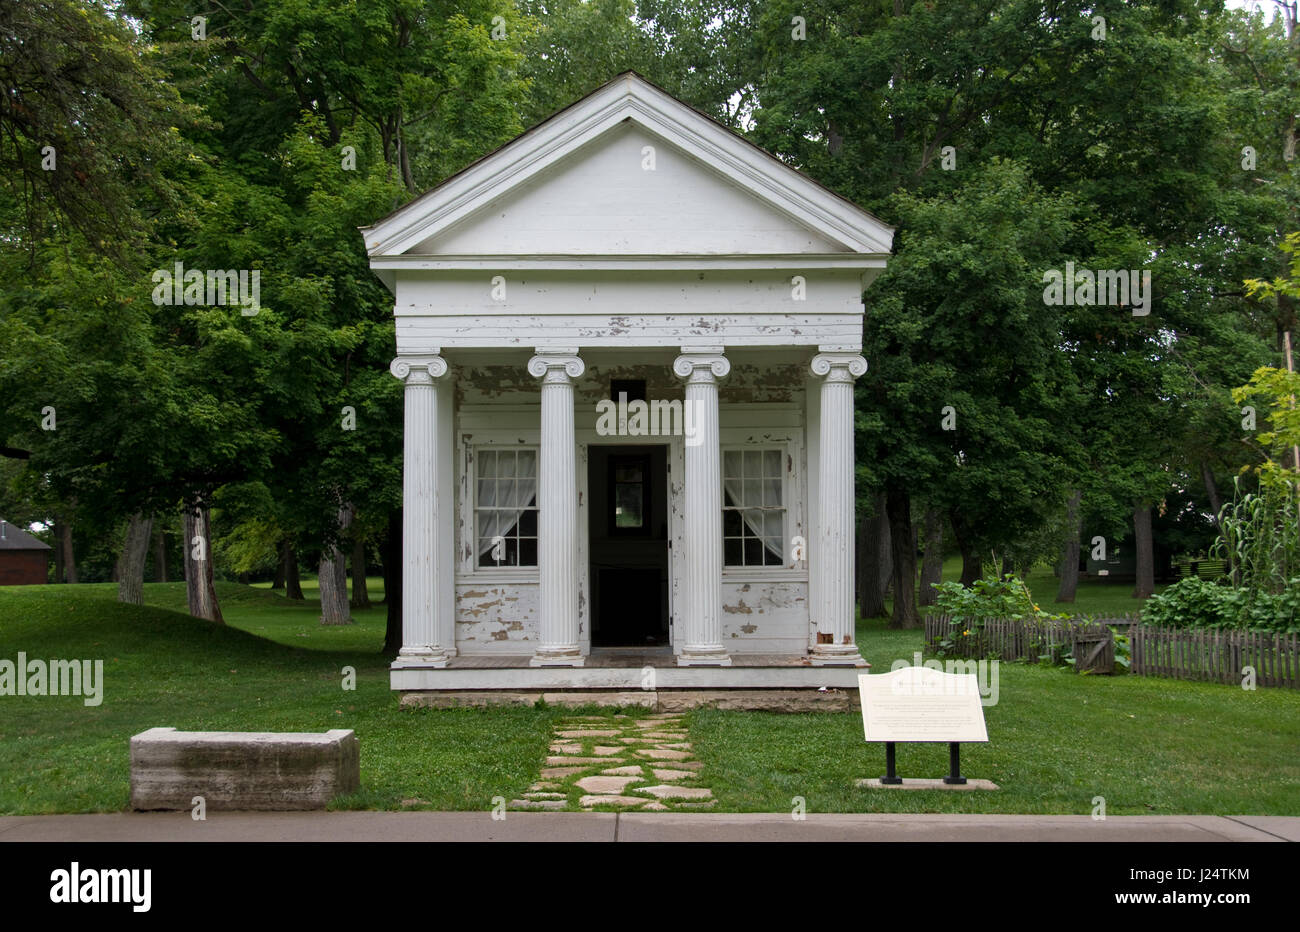 The 1841 Greek Revival style Newcom House, now exhibited at Carillon Historical Park in Dayton, Ohio. Stock Photo